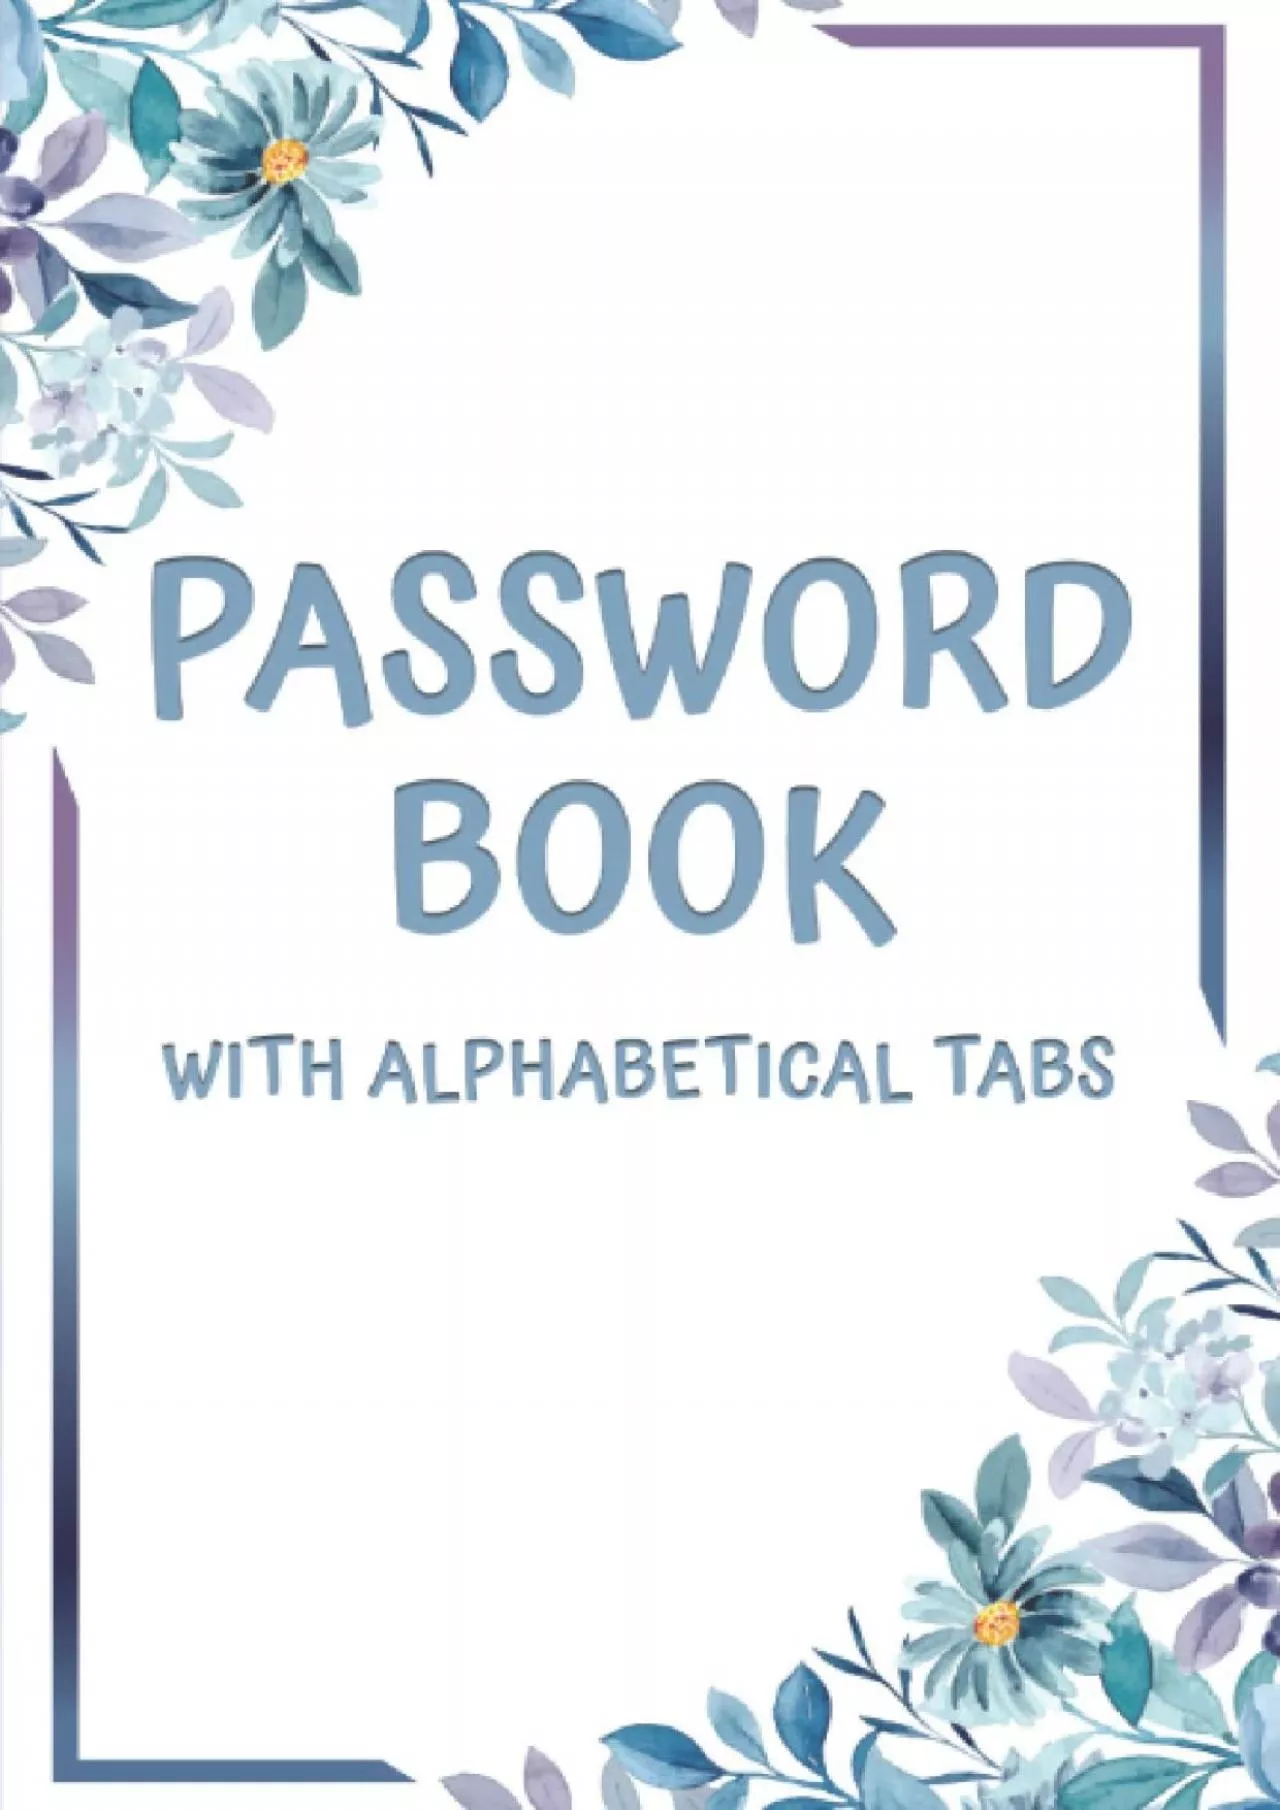 (BOOS)-Gifts for Women Who Have Everything: Password Book with Alphabetical Tabs: Internet